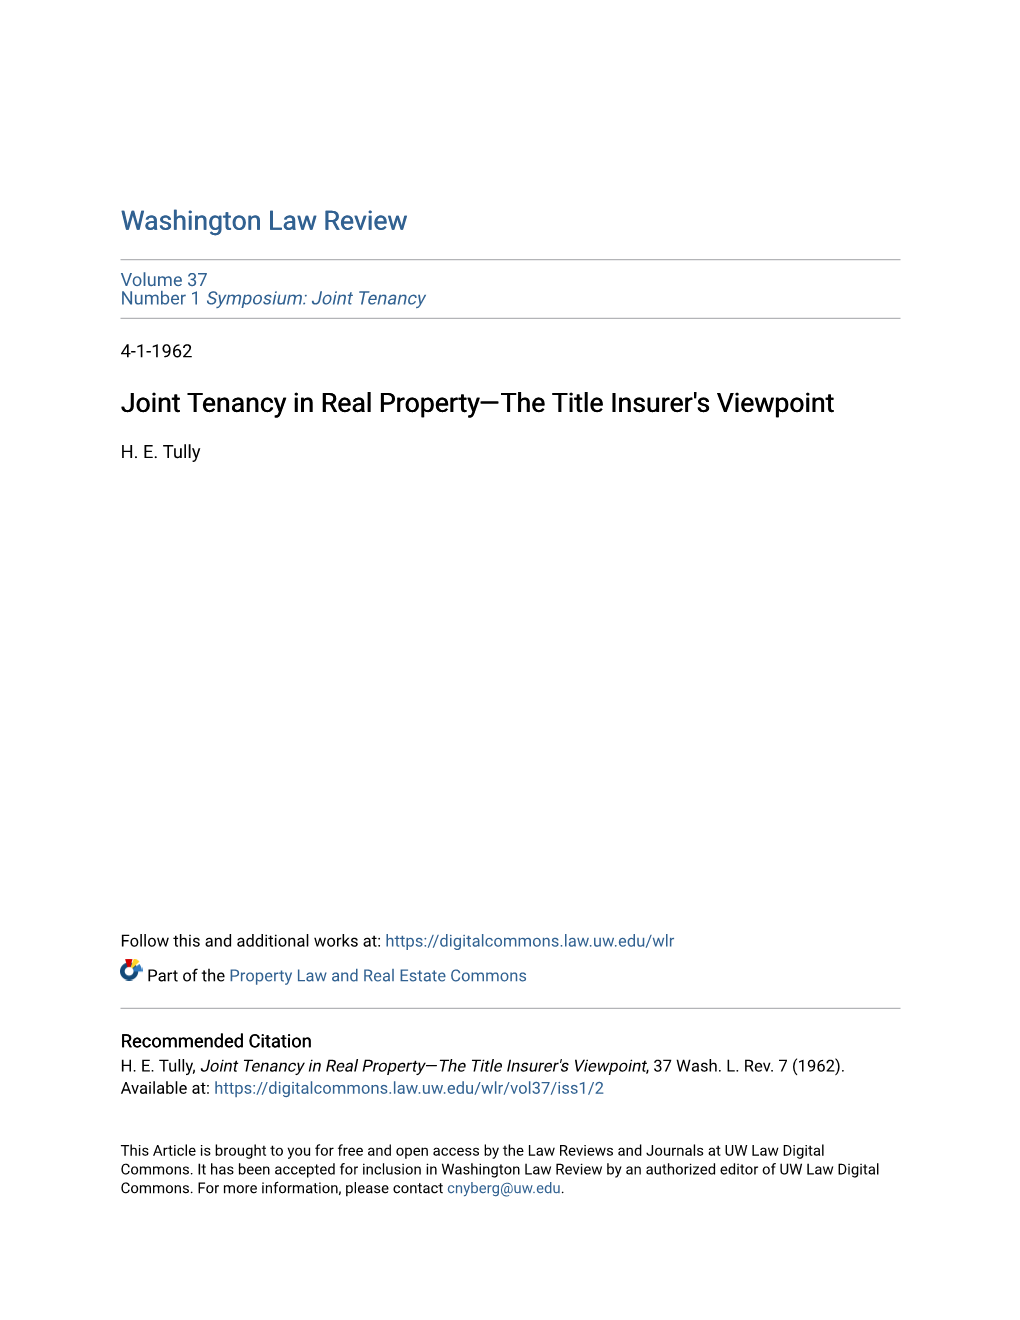 Joint Tenancy in Real Propertyâ•Flthe Title Insurer's Viewpoint